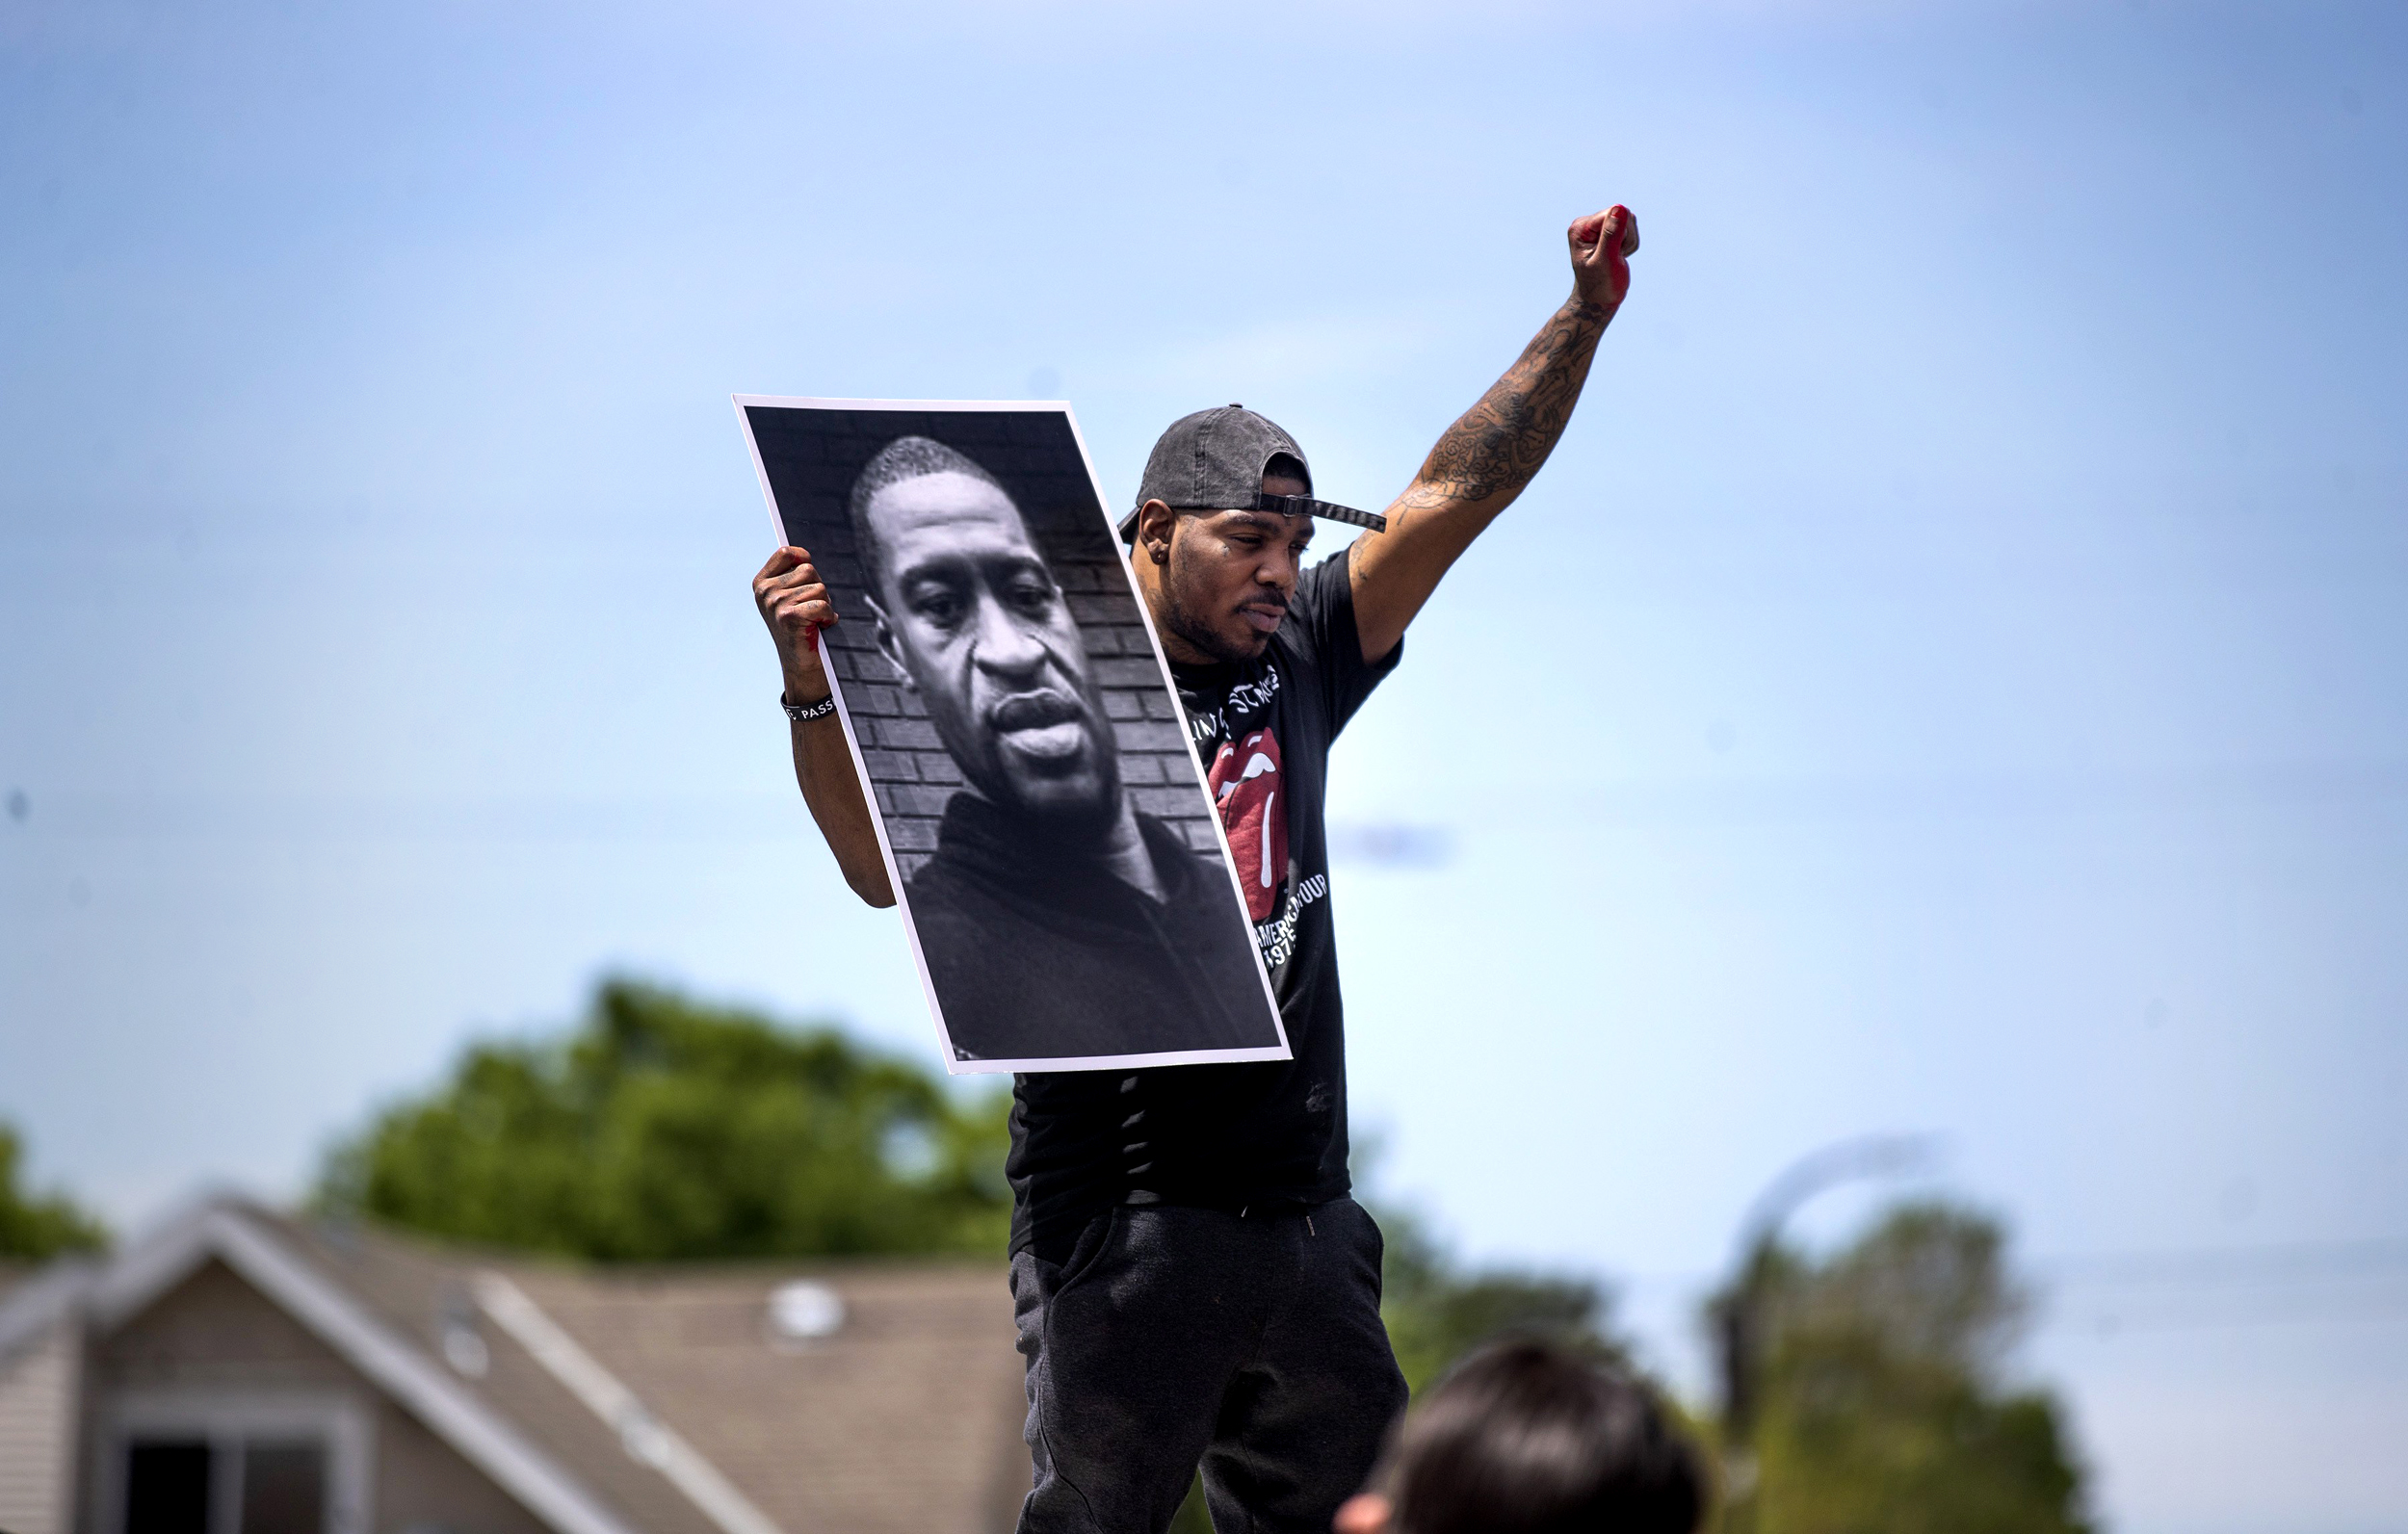 Tony L. Clark holds a photo of George Floyd outside the Cup Food convenience store, Thursday, May 28, 2020, in Minneapolis. Floyd, a handcuffed black man, died Monday in police custody near the convenience story.(Jerry Holt/Star Tribune via AP)